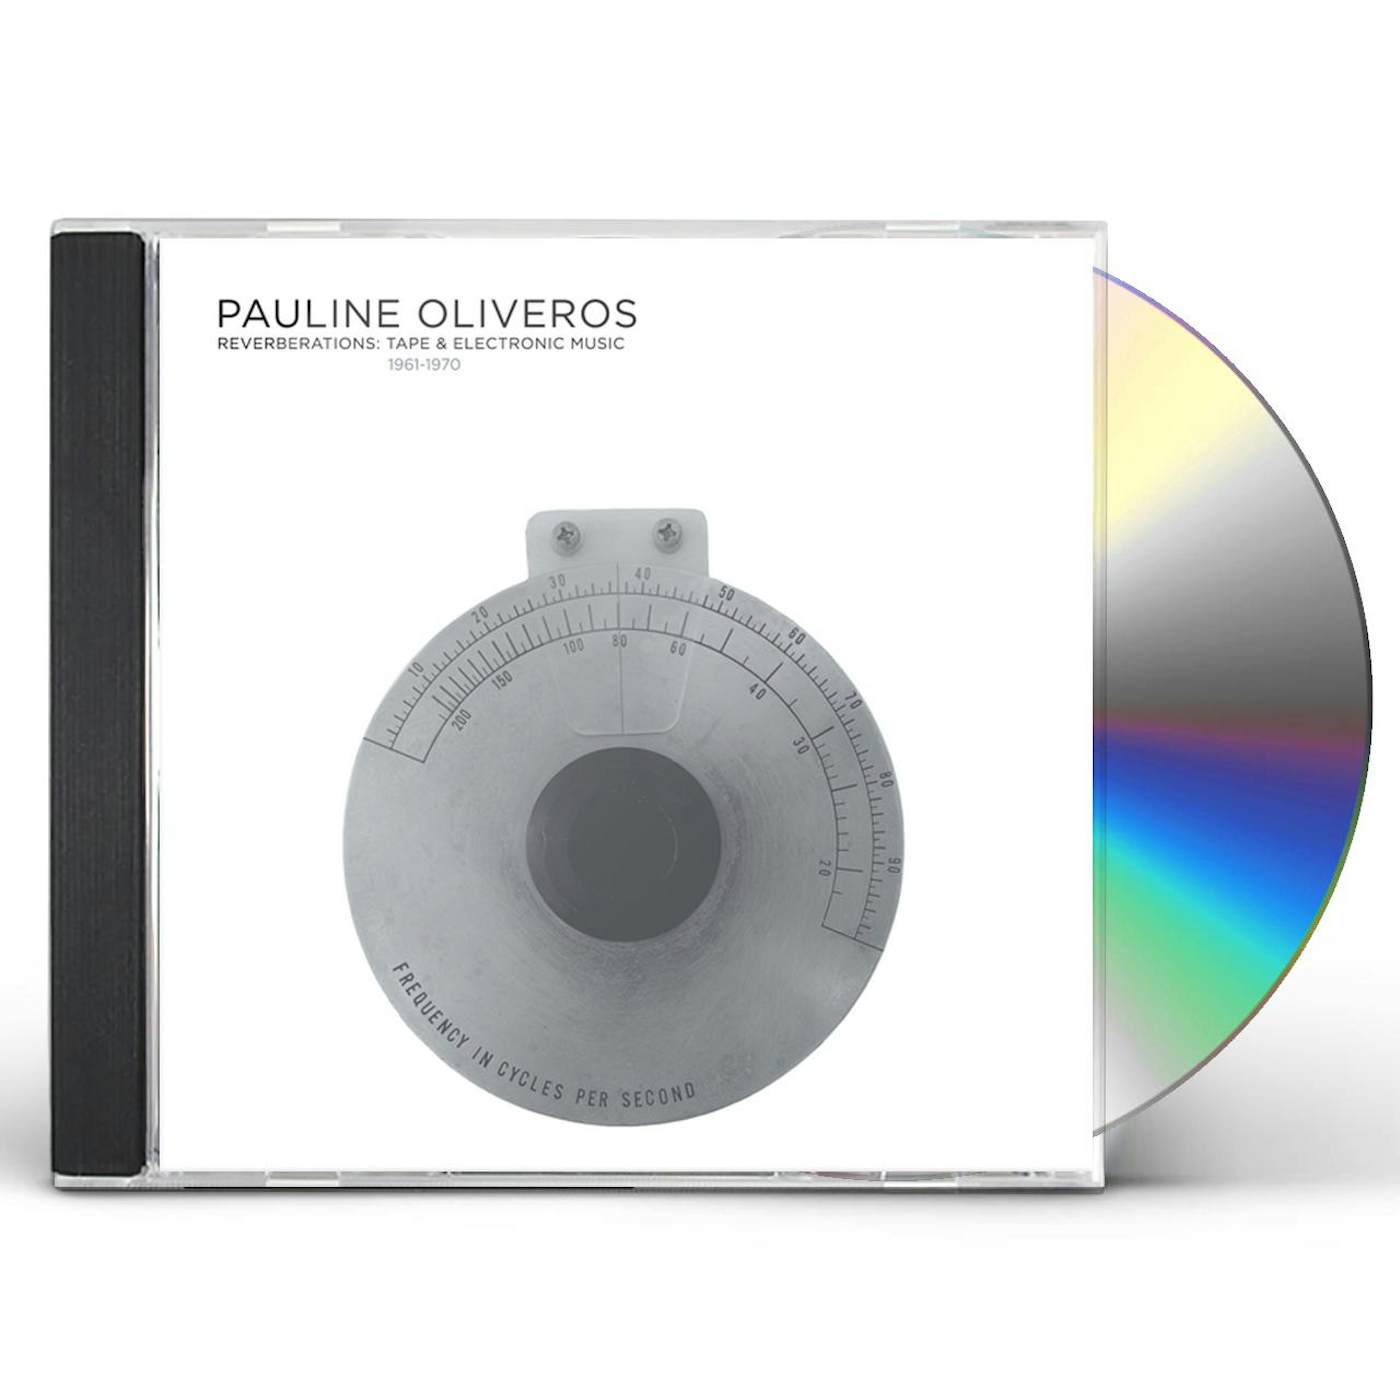 Pauline Oliveros REVERBERATIONS: TAPE & ELECTRONIC MUSIC 1960-1970 CD